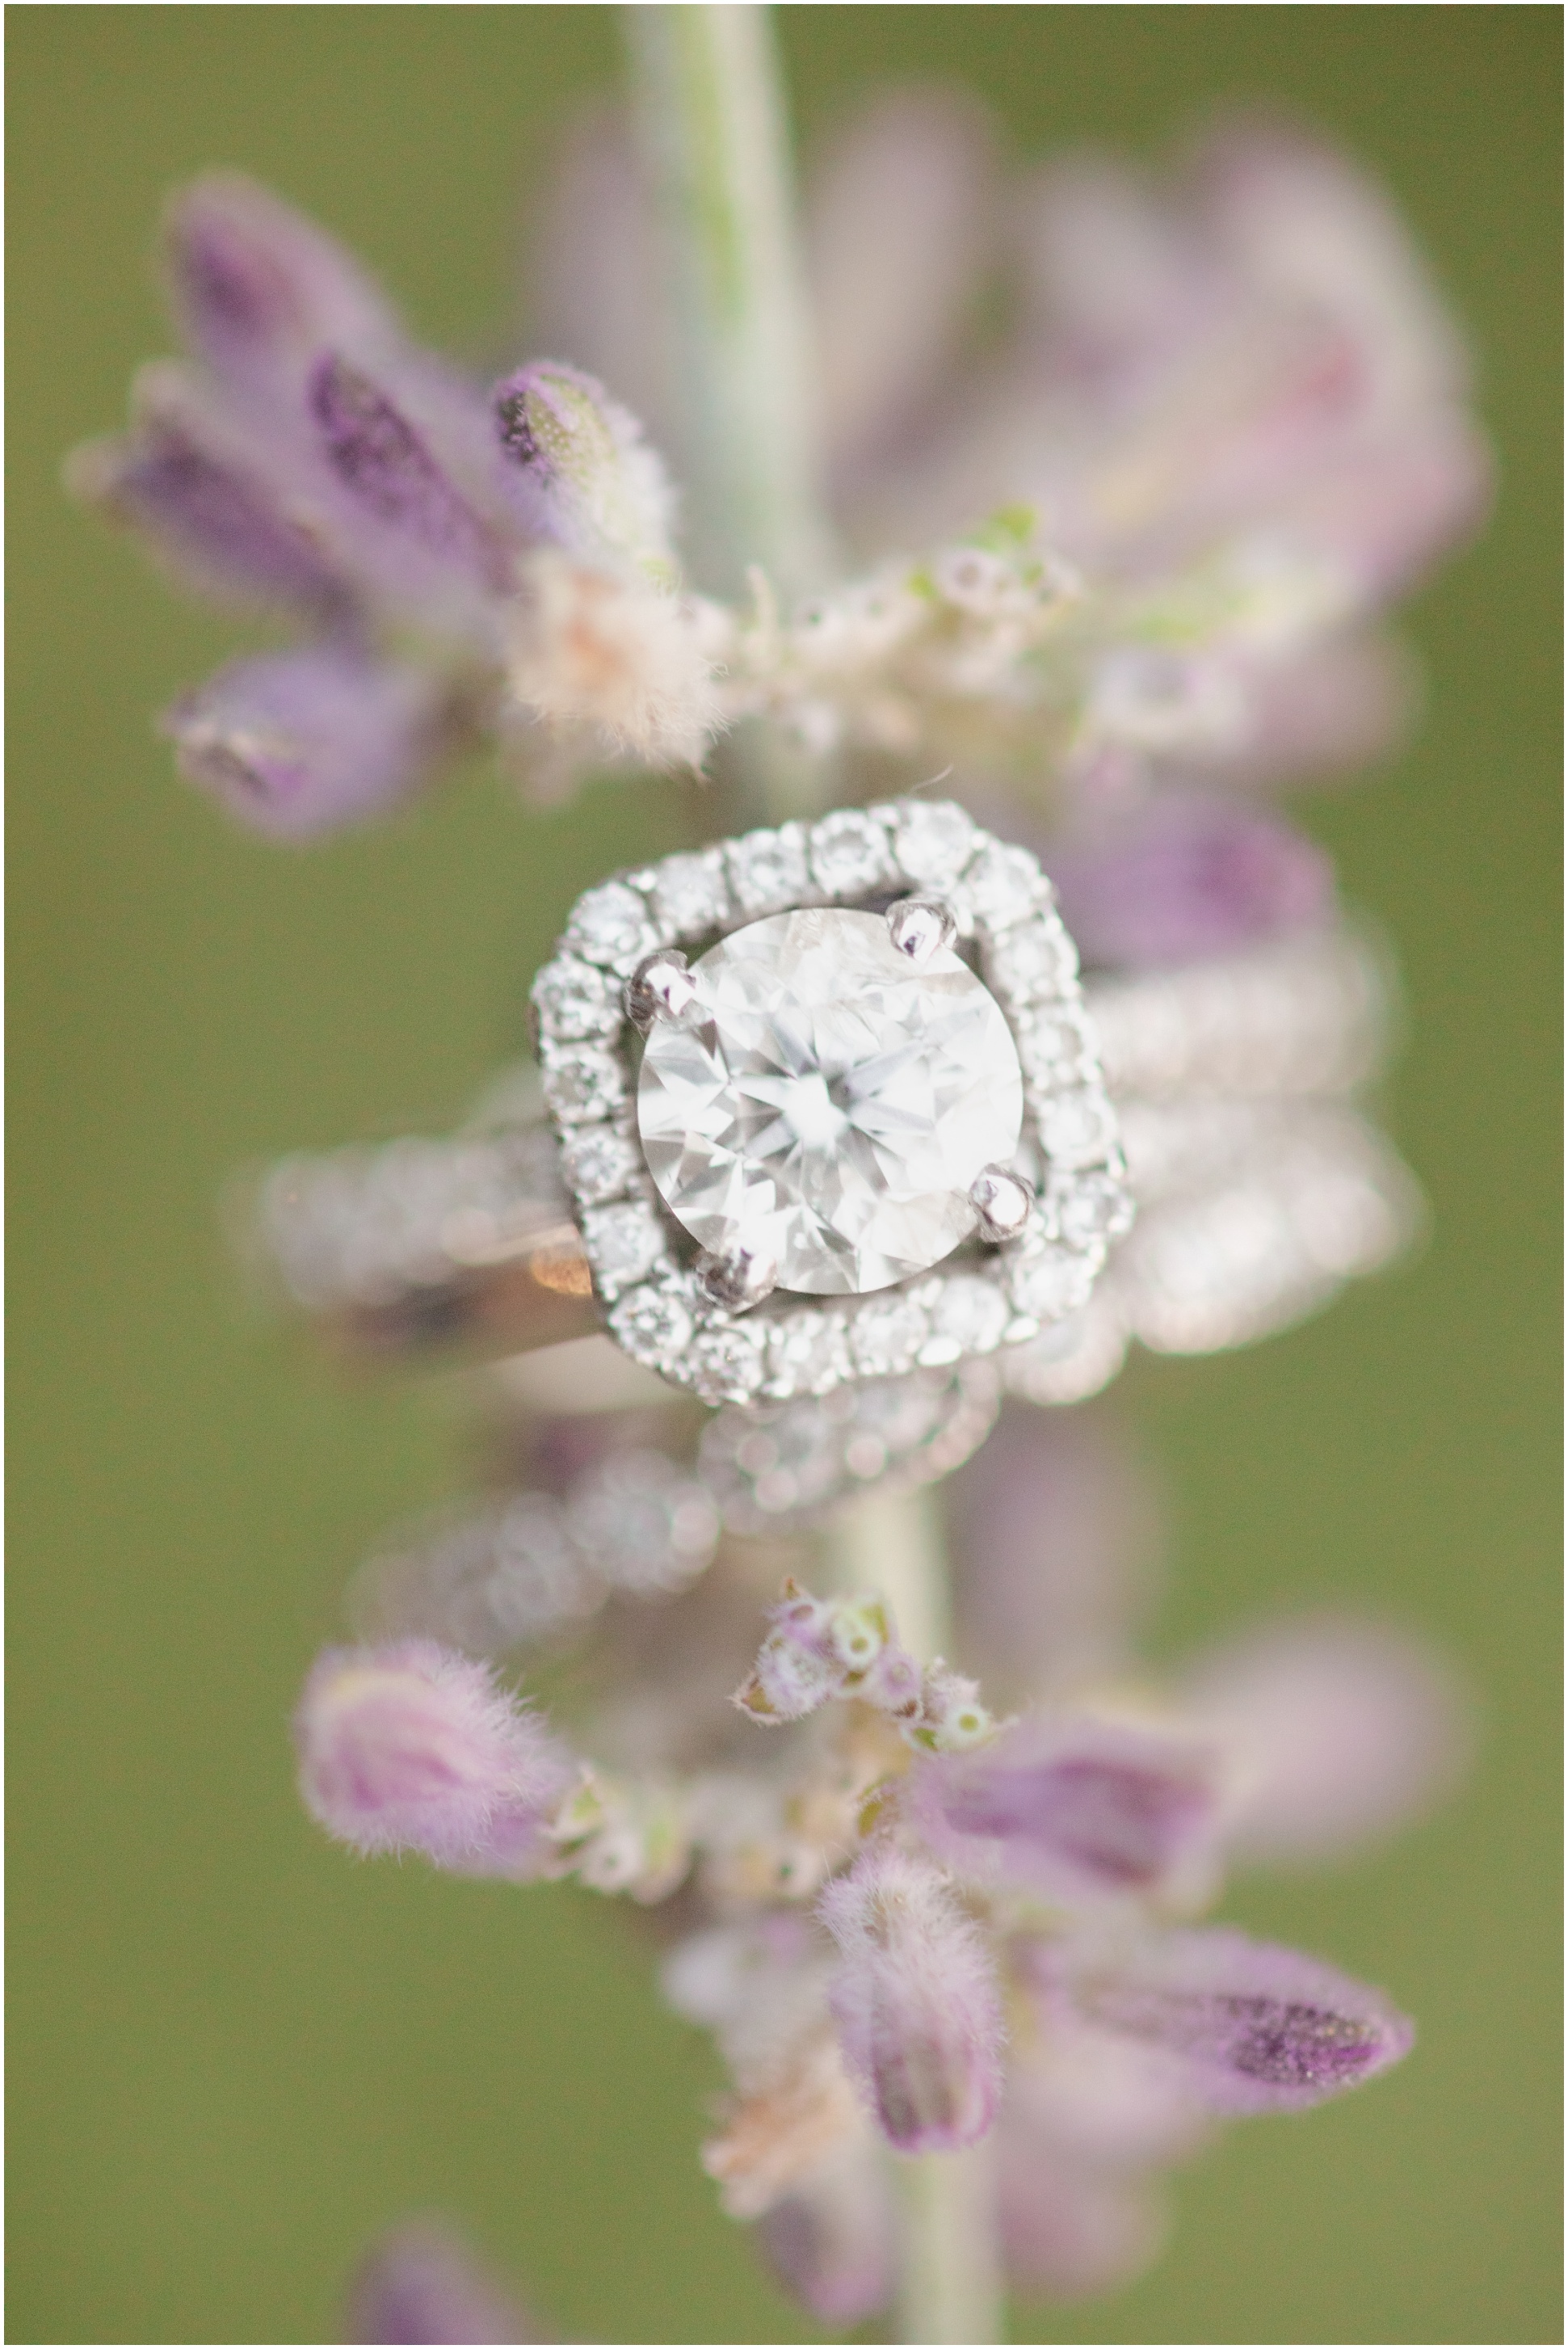 Square, two tiered engagement ring on lavender flower